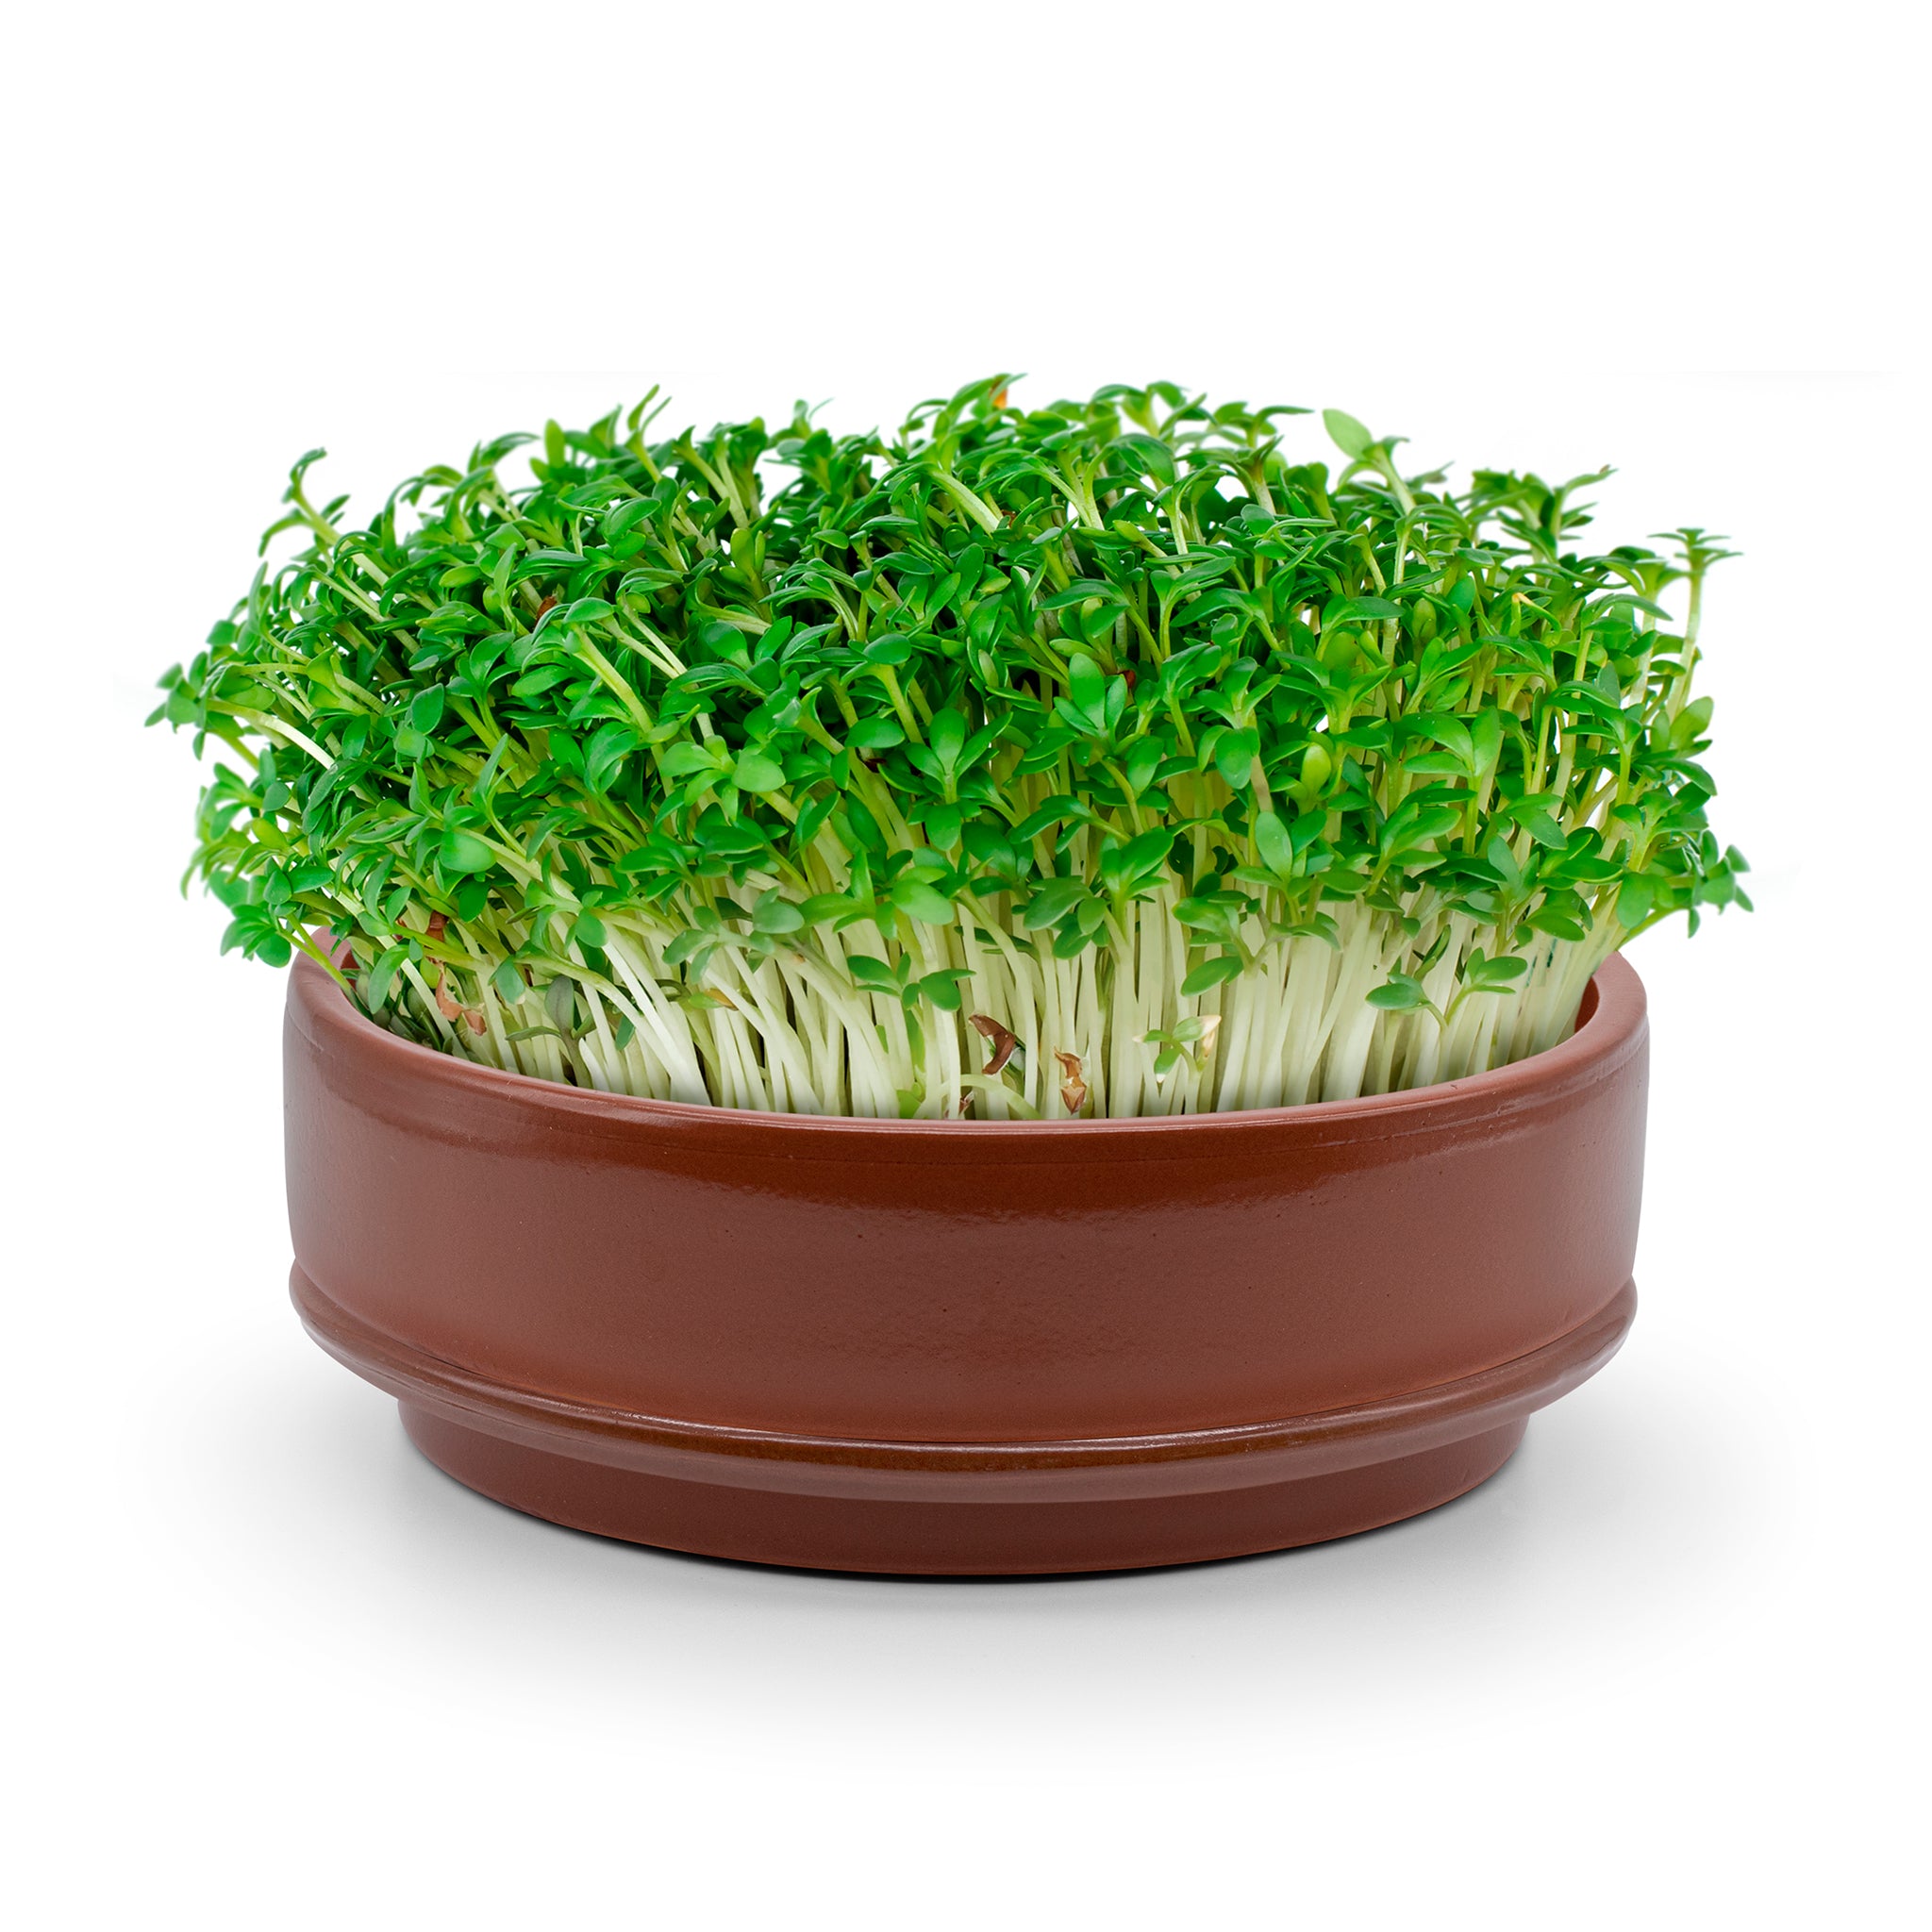 End result of microgreen growing kit